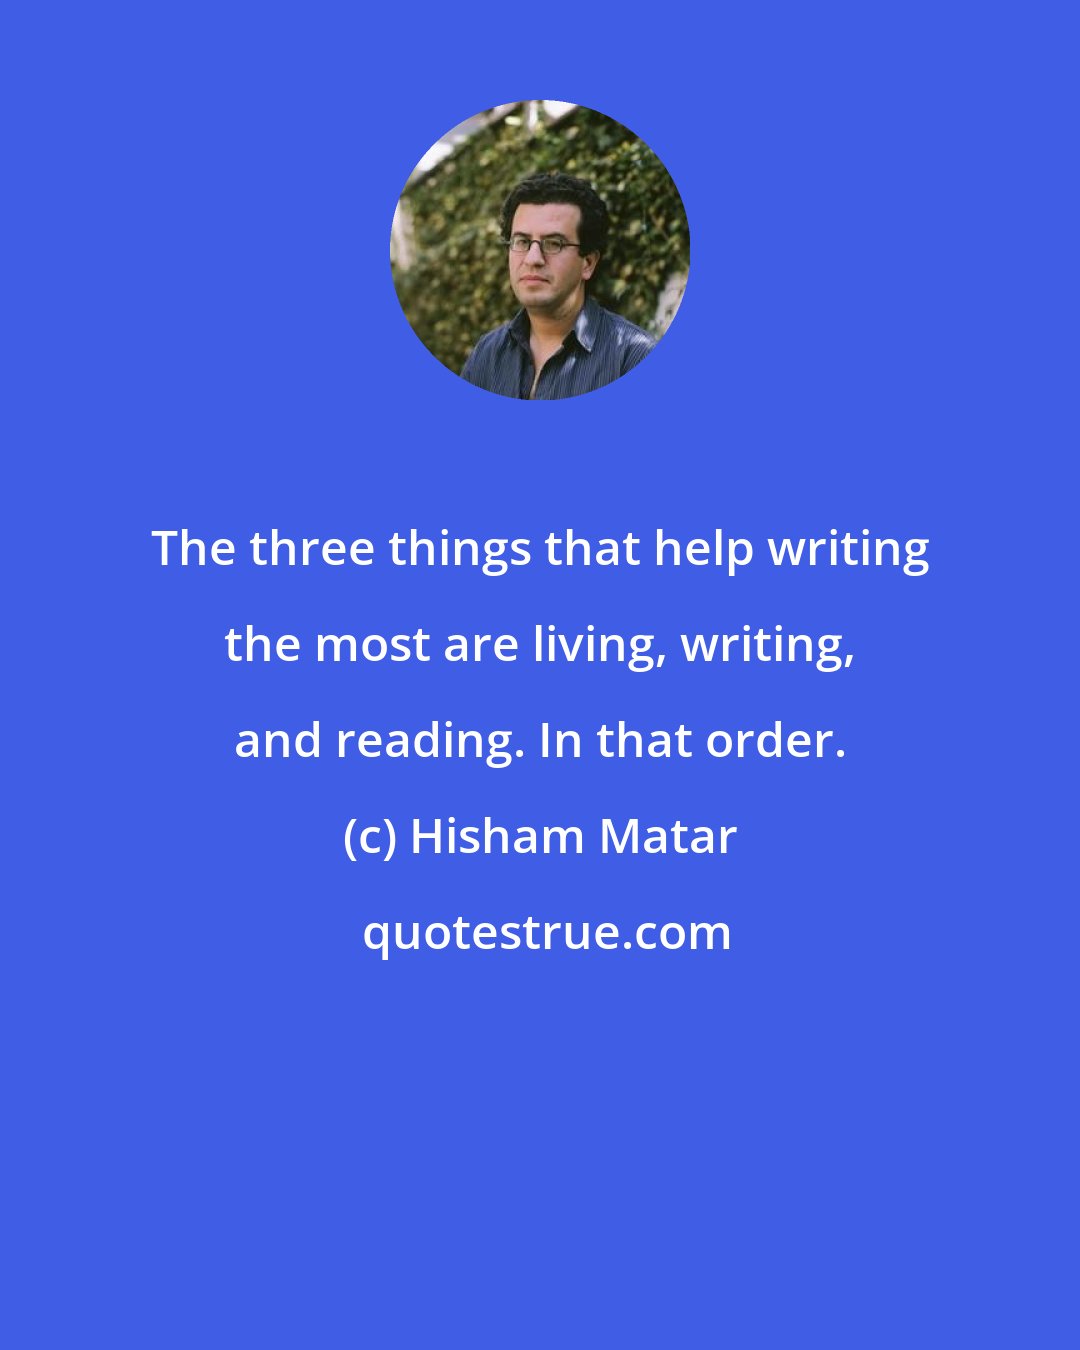 Hisham Matar: The three things that help writing the most are living, writing, and reading. In that order.